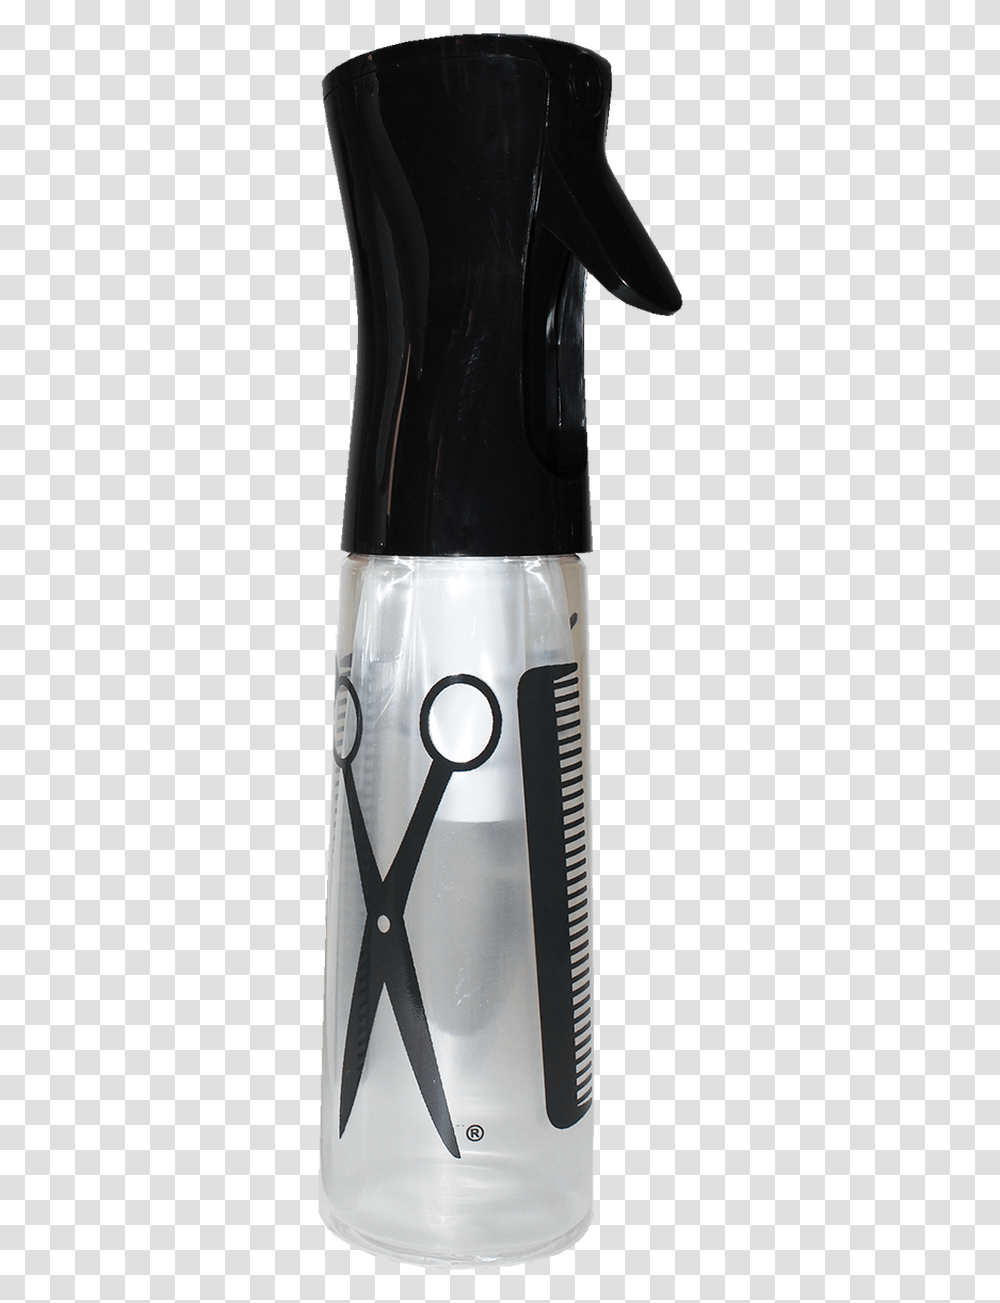 Spray Bottle Continuous Spray Combscissors, Cosmetics, Can, Deodorant, Spray Can Transparent Png